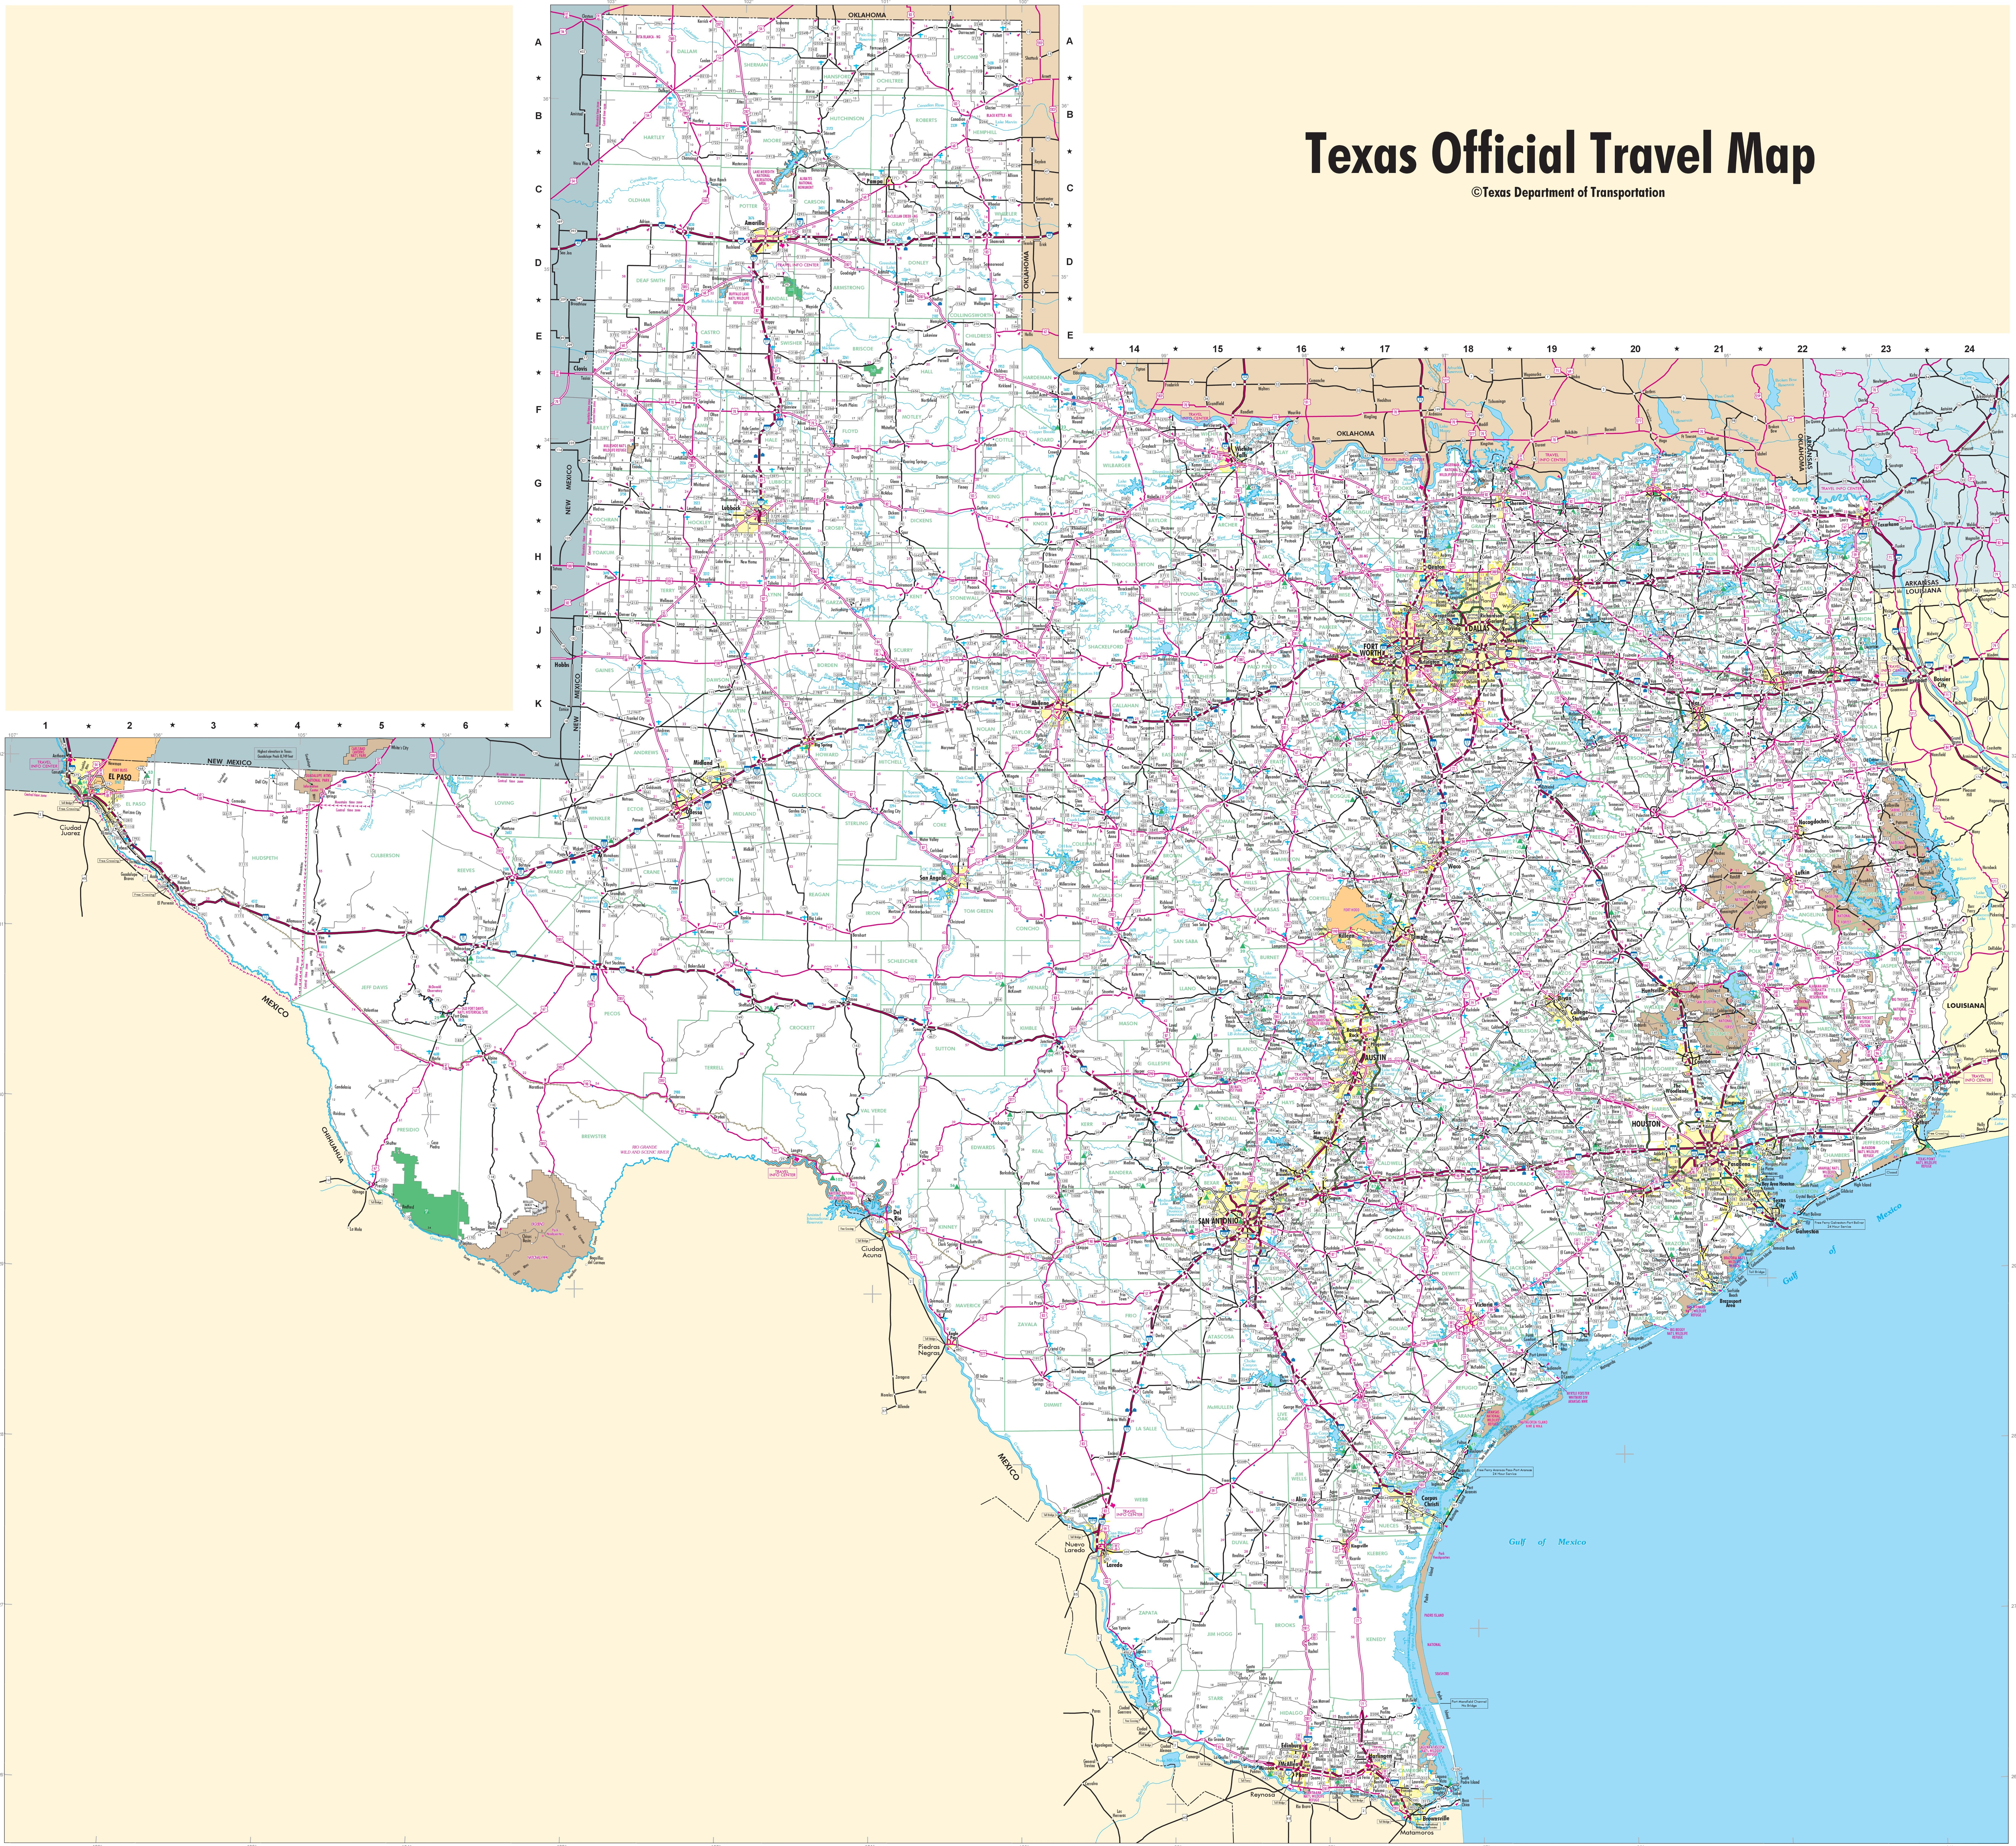 Texas Small Towns Map And Travel Information | Download Free Texas - Travel Texas Map